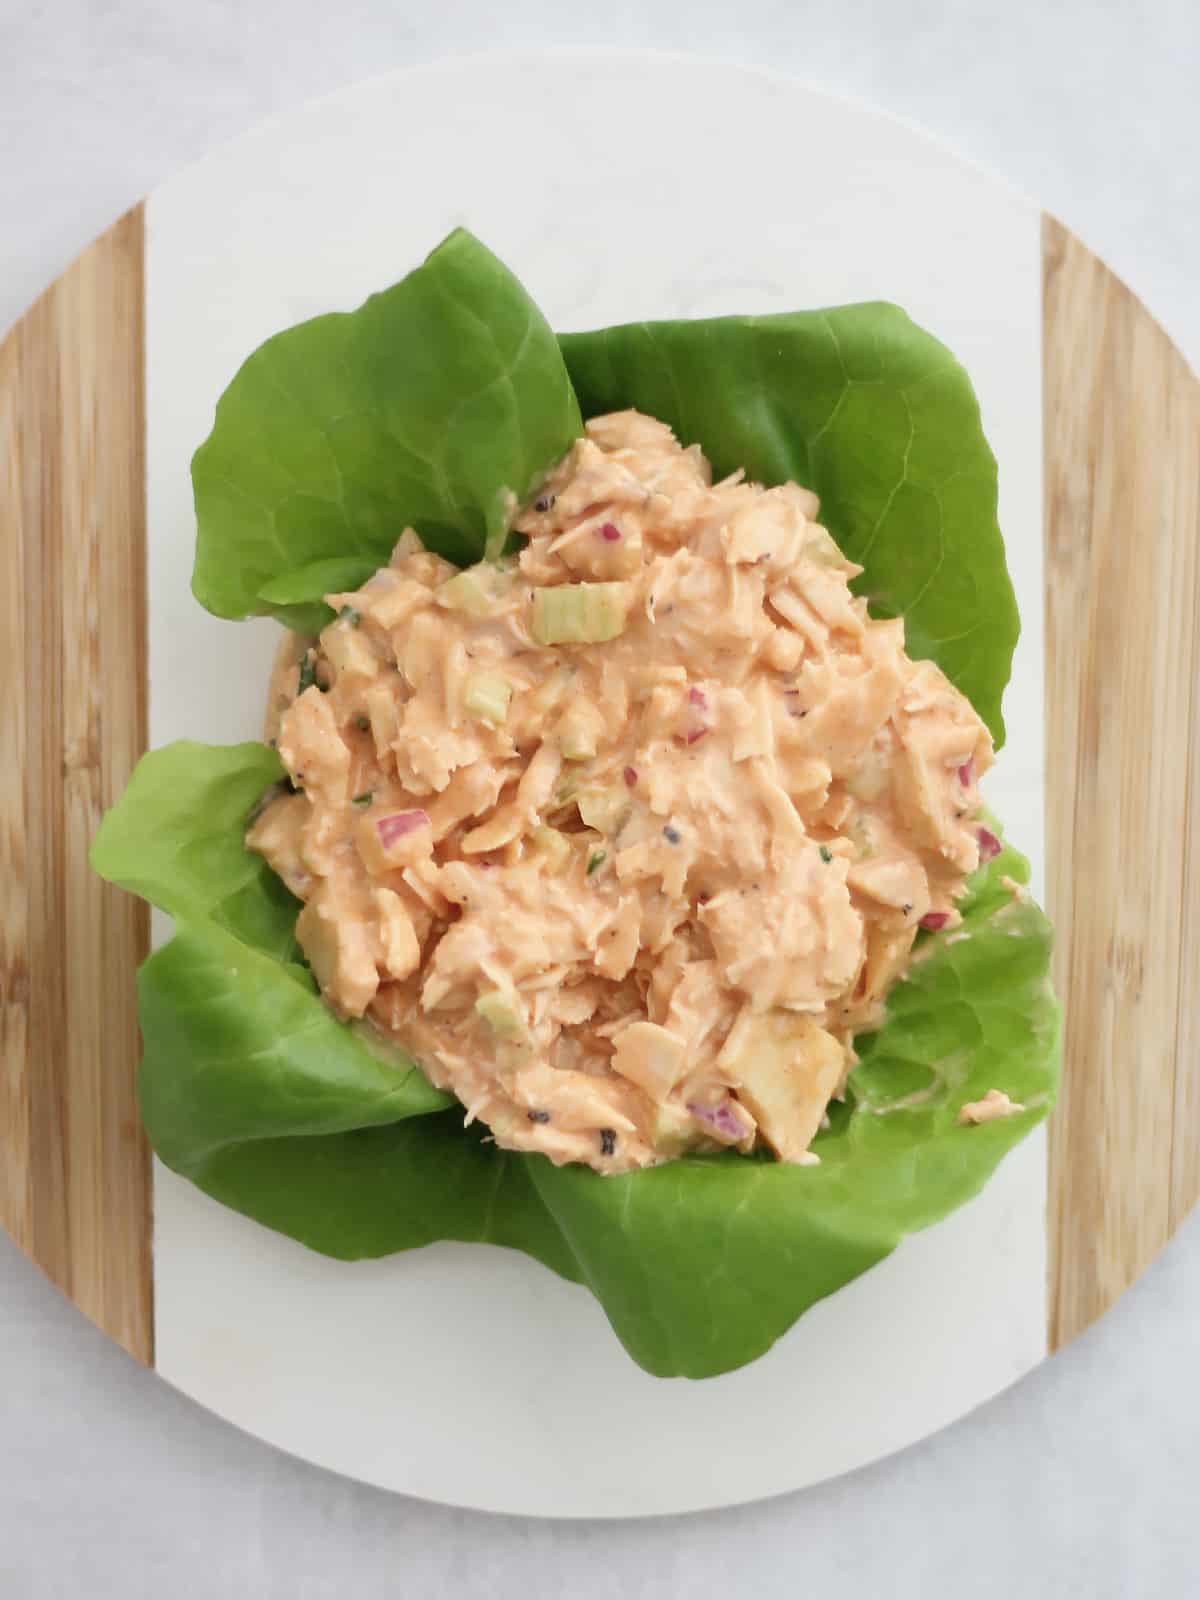 Buffalo tuna salad on top of a slice of bread and lettuce leaves.